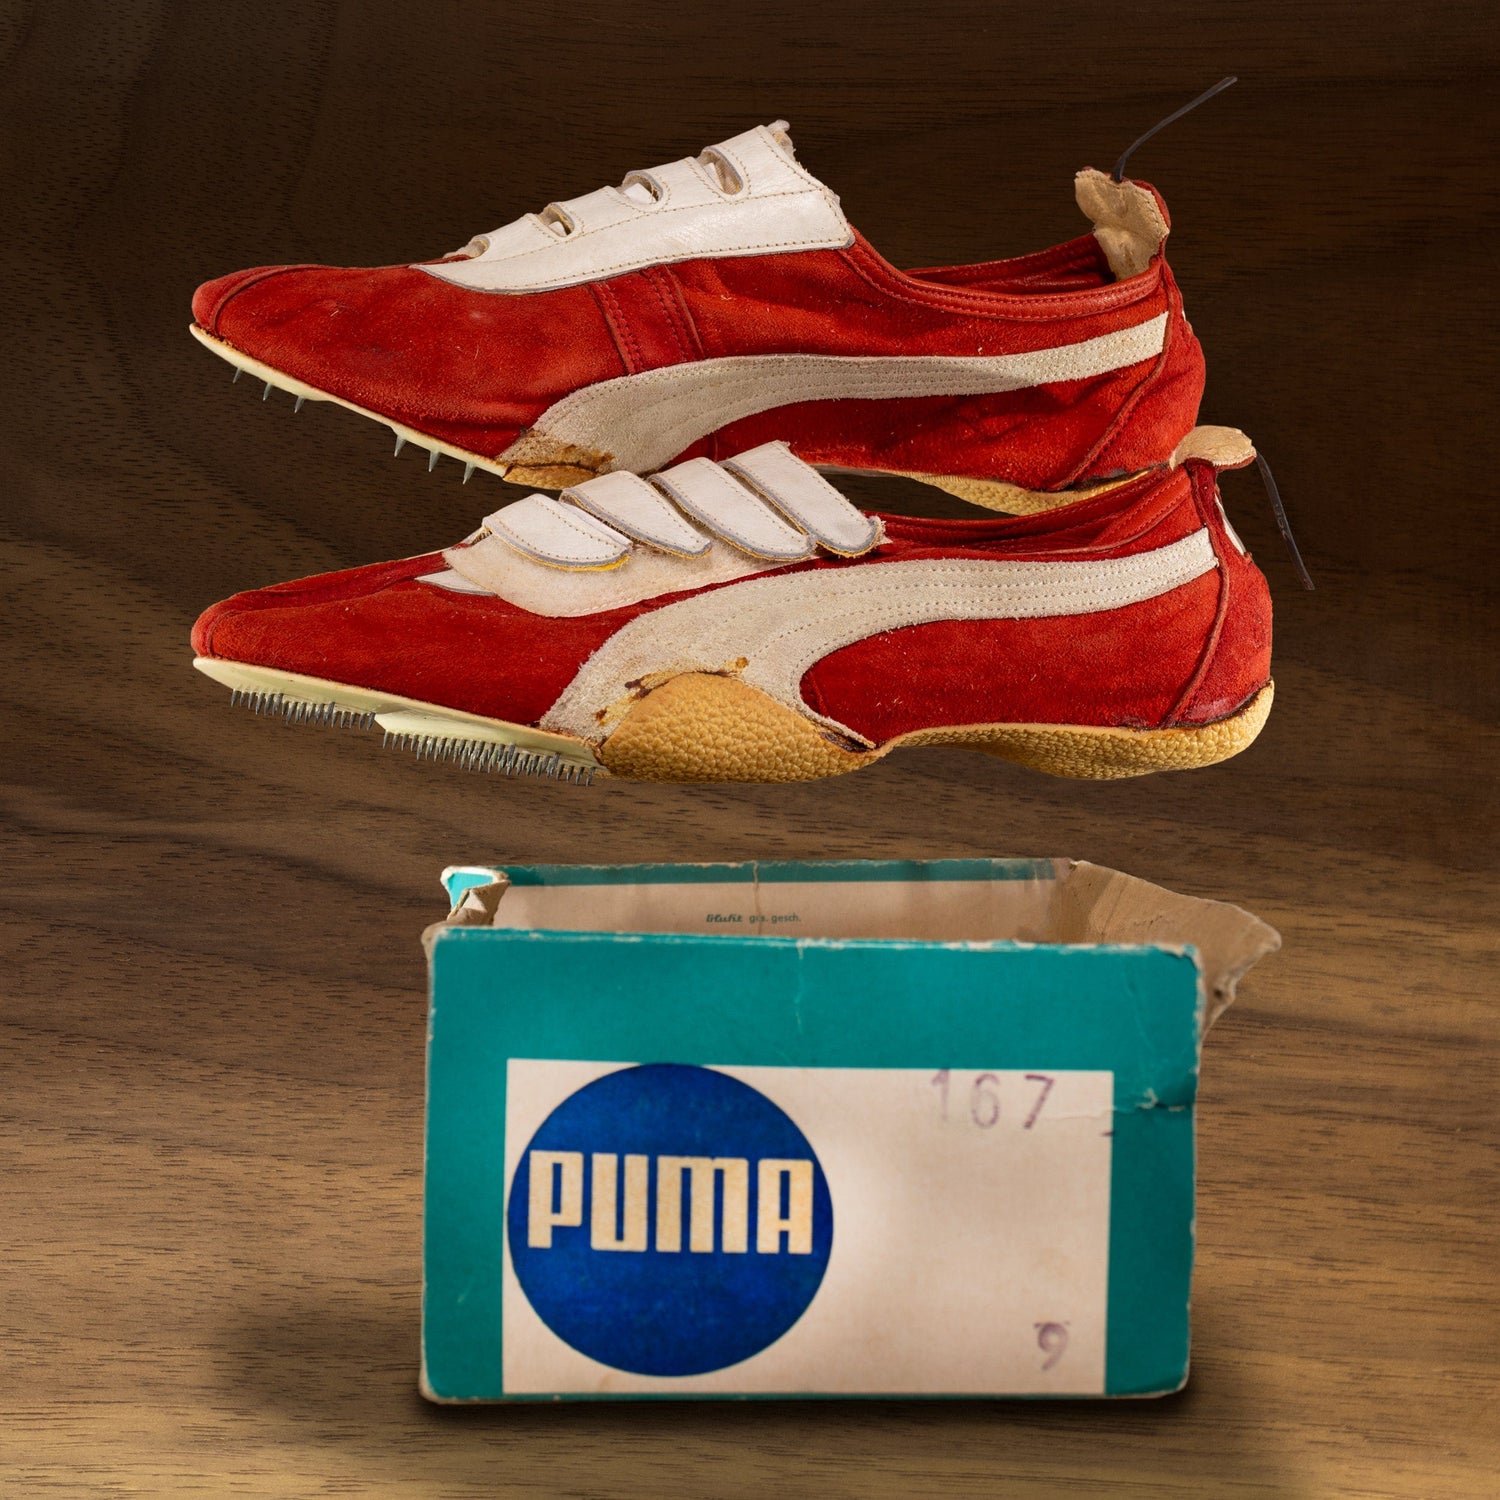 5 most expensive Puma sneakers of all time